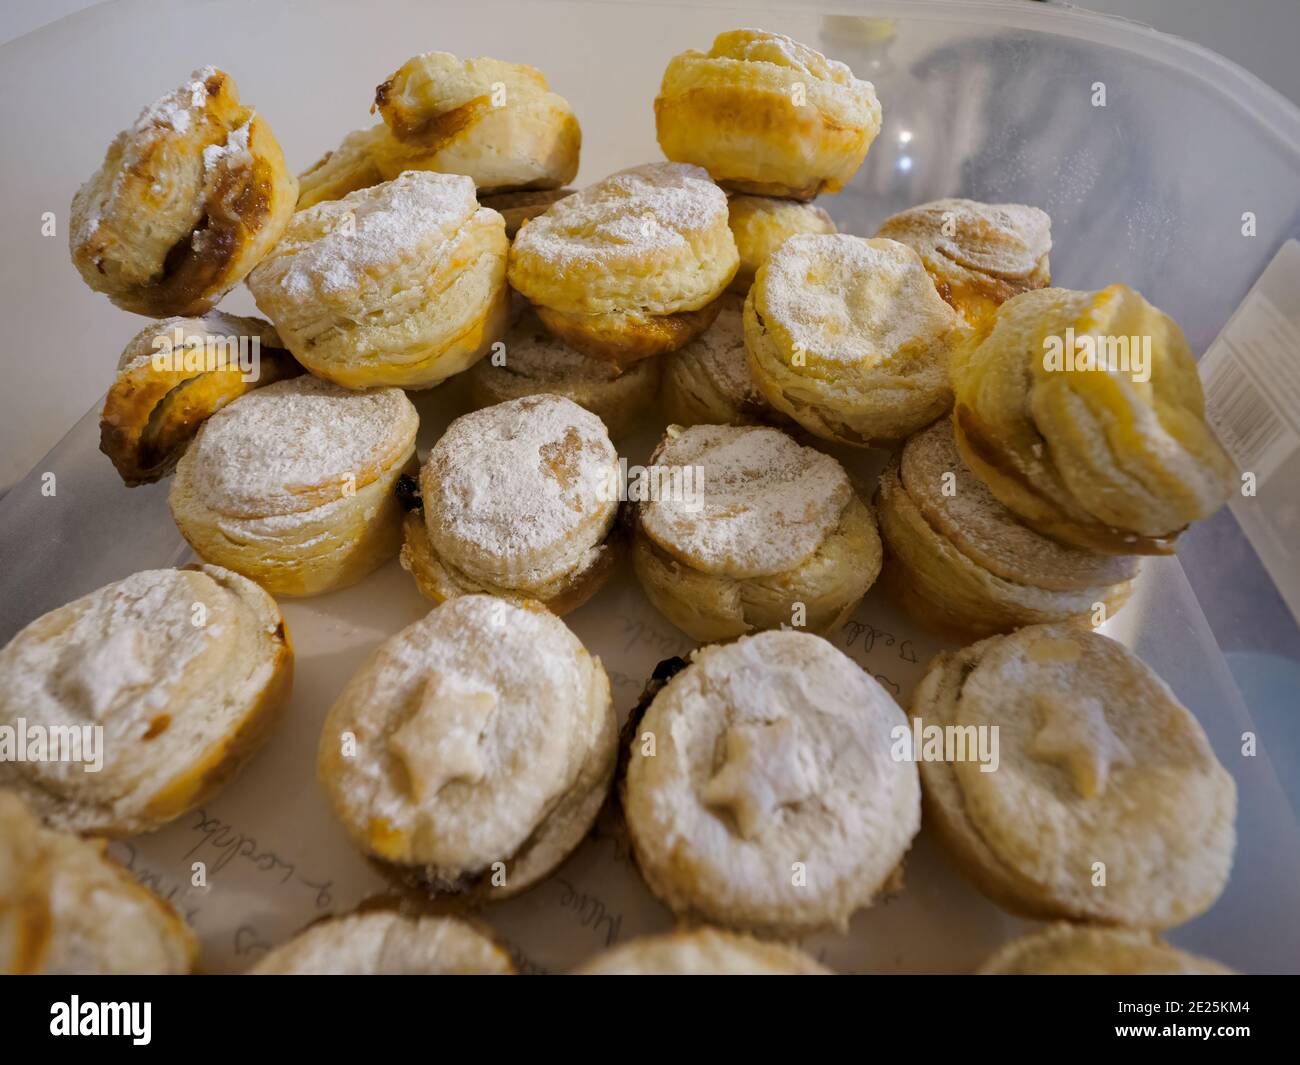 Tupperware container with lots of Mince pies, UK Stock Photo